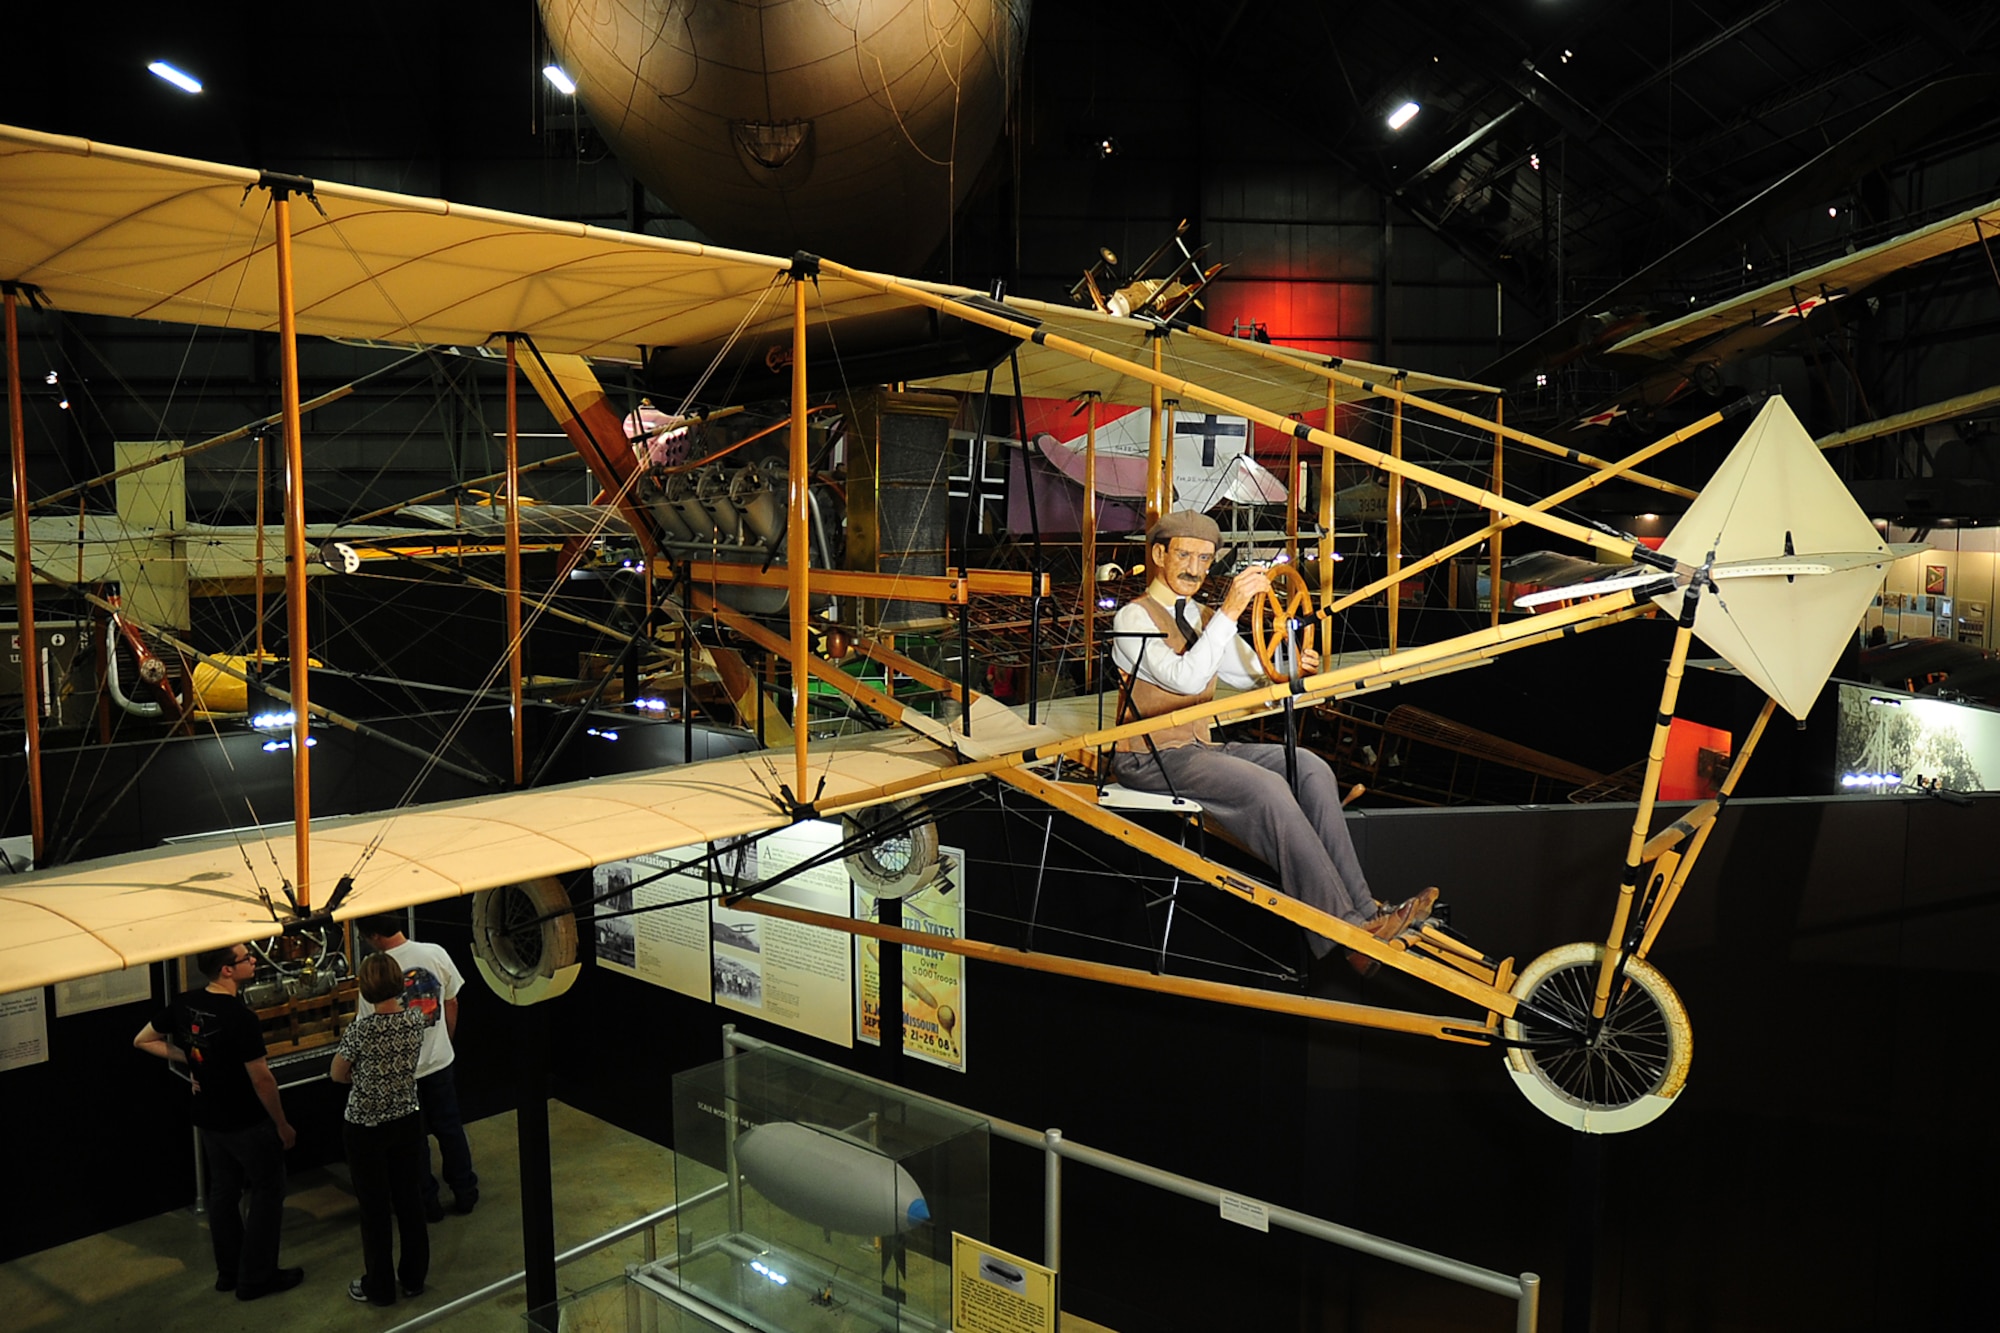 DAYTON, Ohio -- Curtiss 1911 Model D on display in the Early Years Gallery at the National Museum of the United States Air Force. (U.S. Air Force photo by Ken LaRock) 